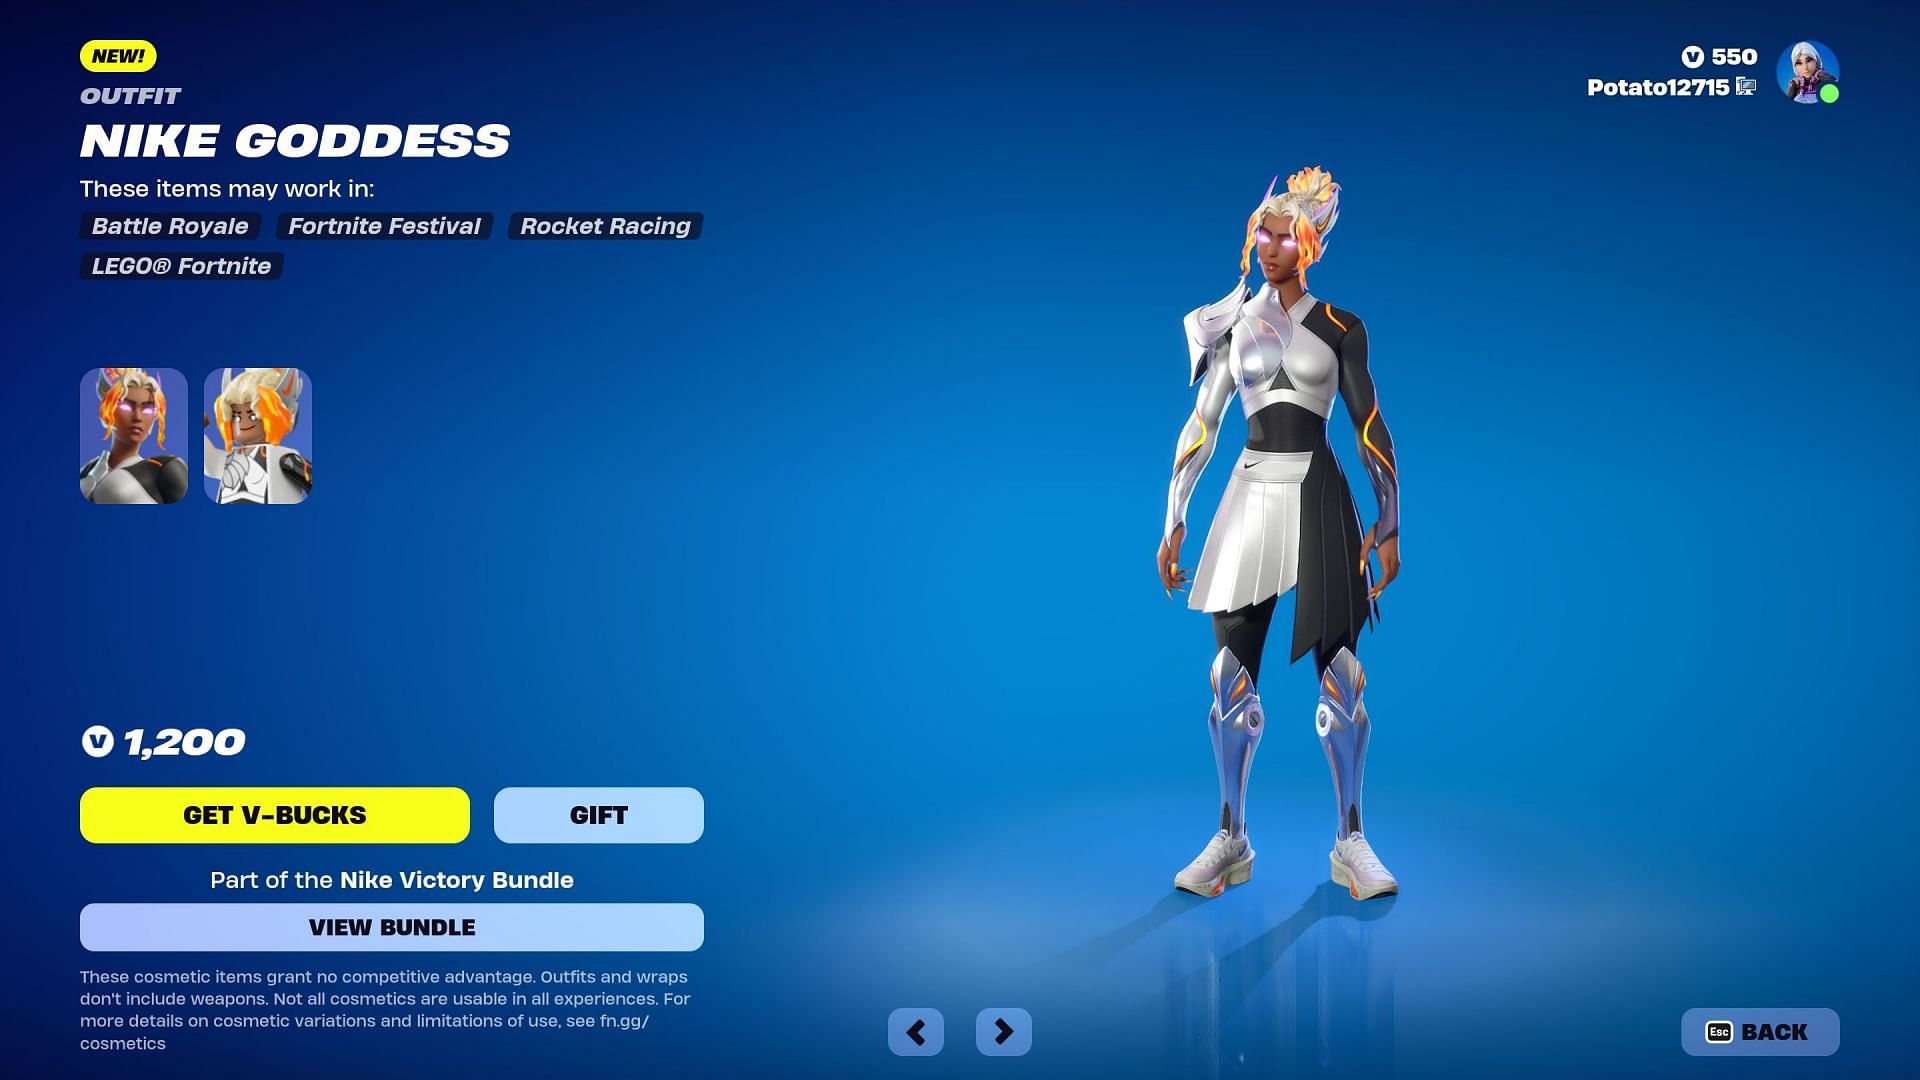 Nike Goddess skin could be listed in the Item Shop for a considerable amount of time (Image via Epic Games/Fortnite)